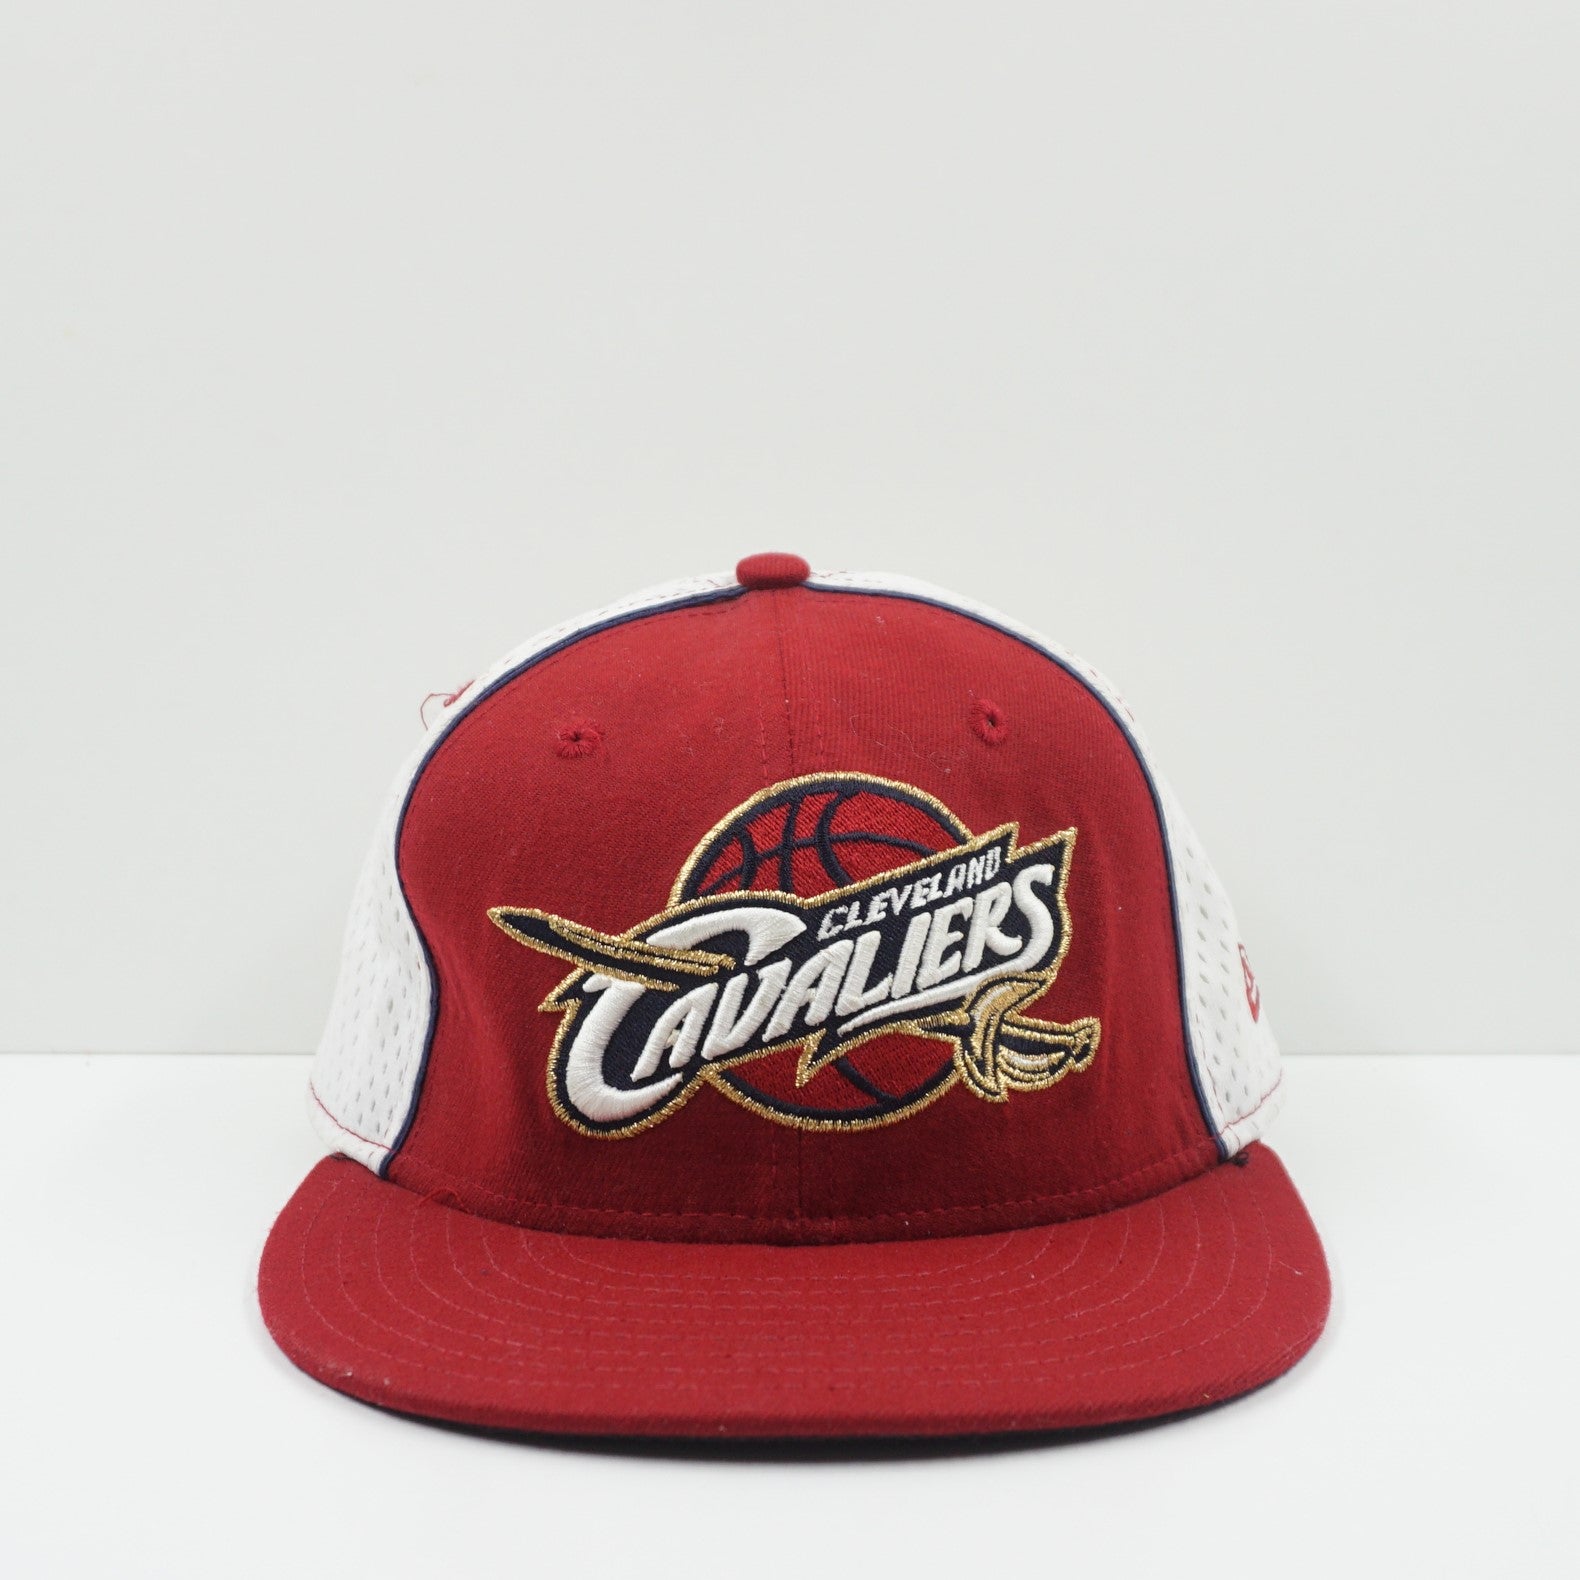 Vintage New Era Cleveland Cavaliers 2002/2005 Fitted Cap